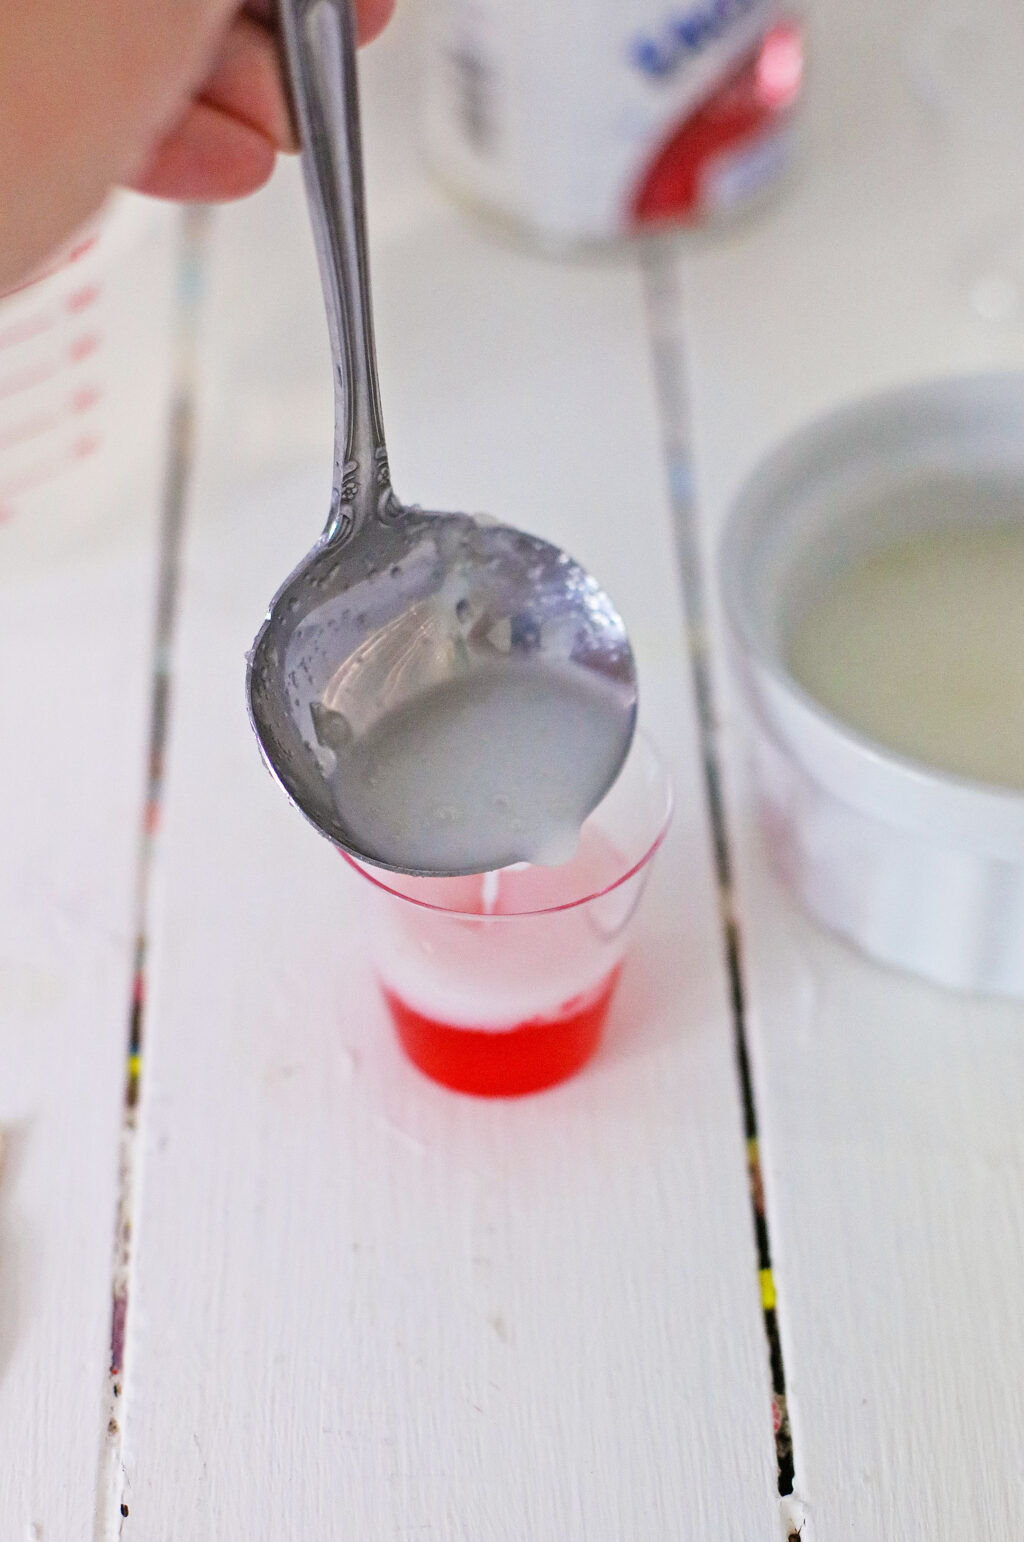 white layer of jello being poured into red jello shot glass